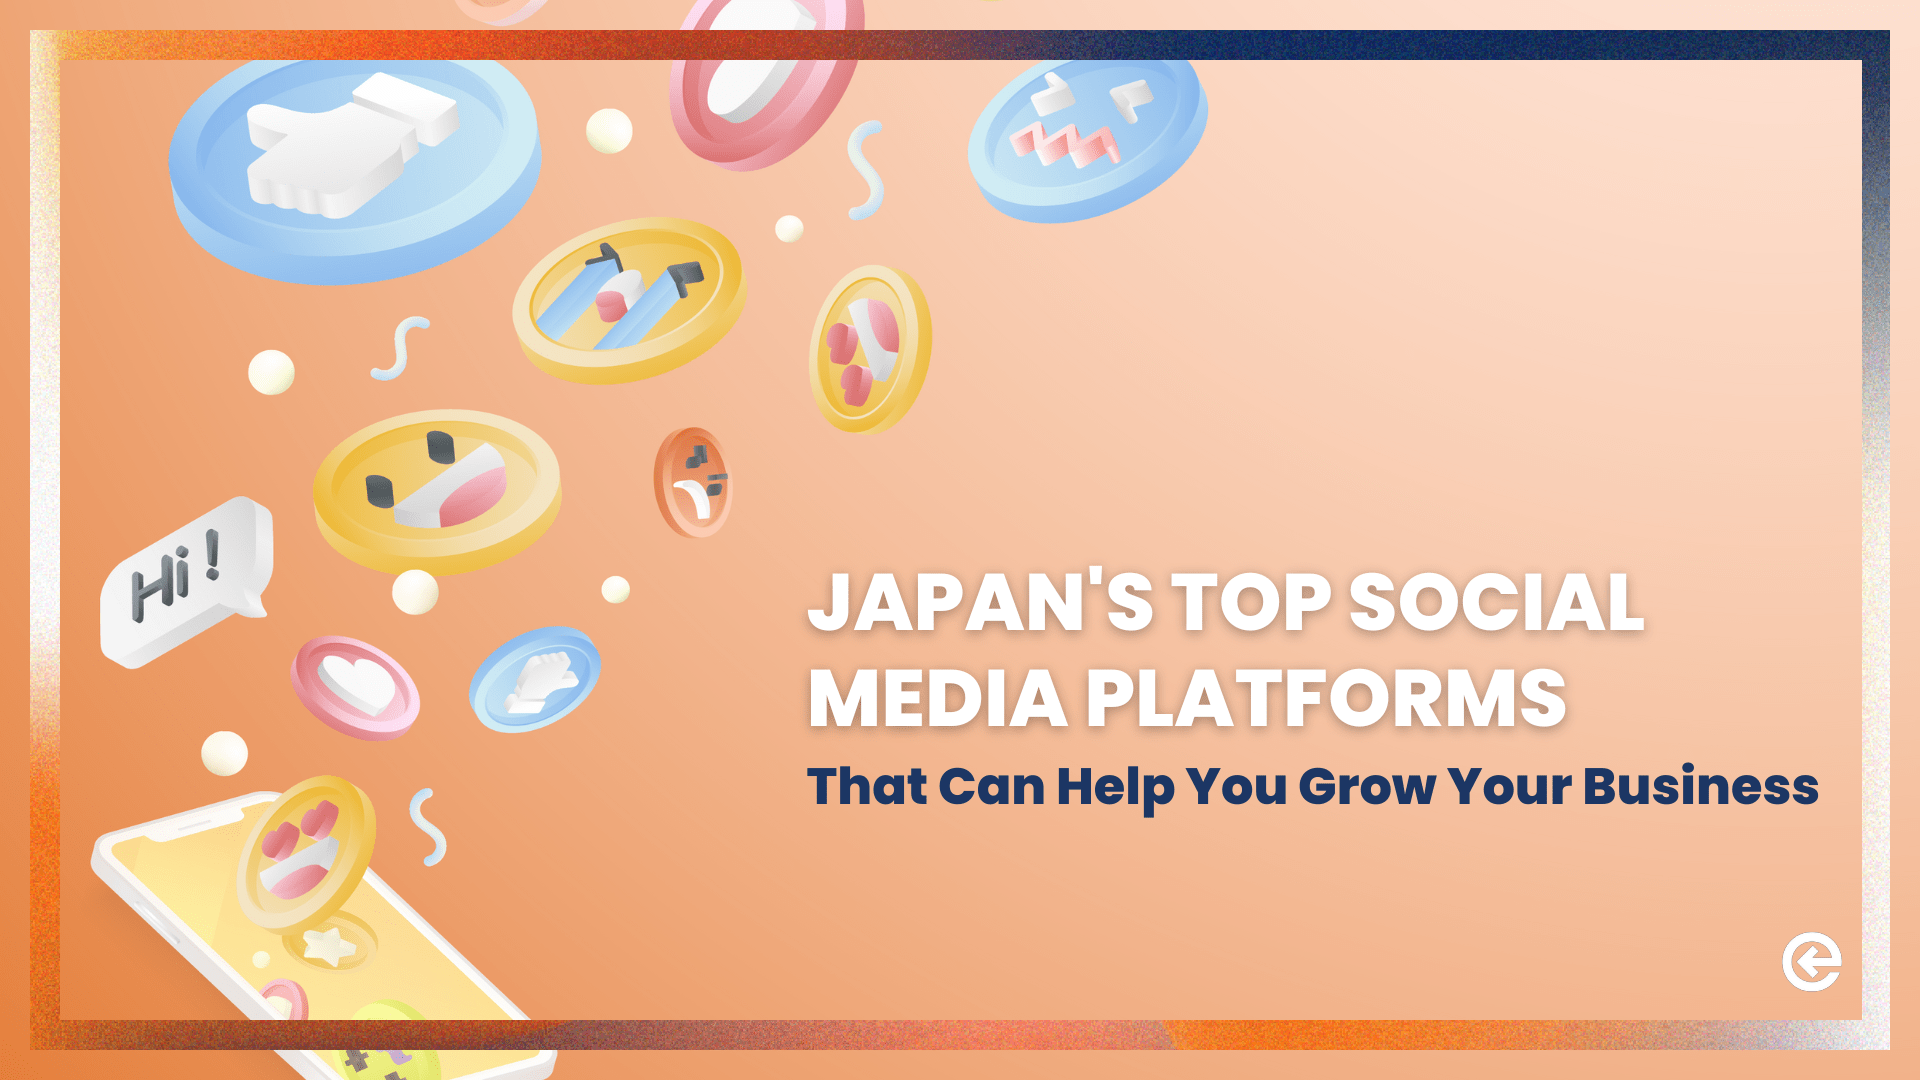 Japan's Top Social Media Platforms in That Can Help You Grow Your Brand